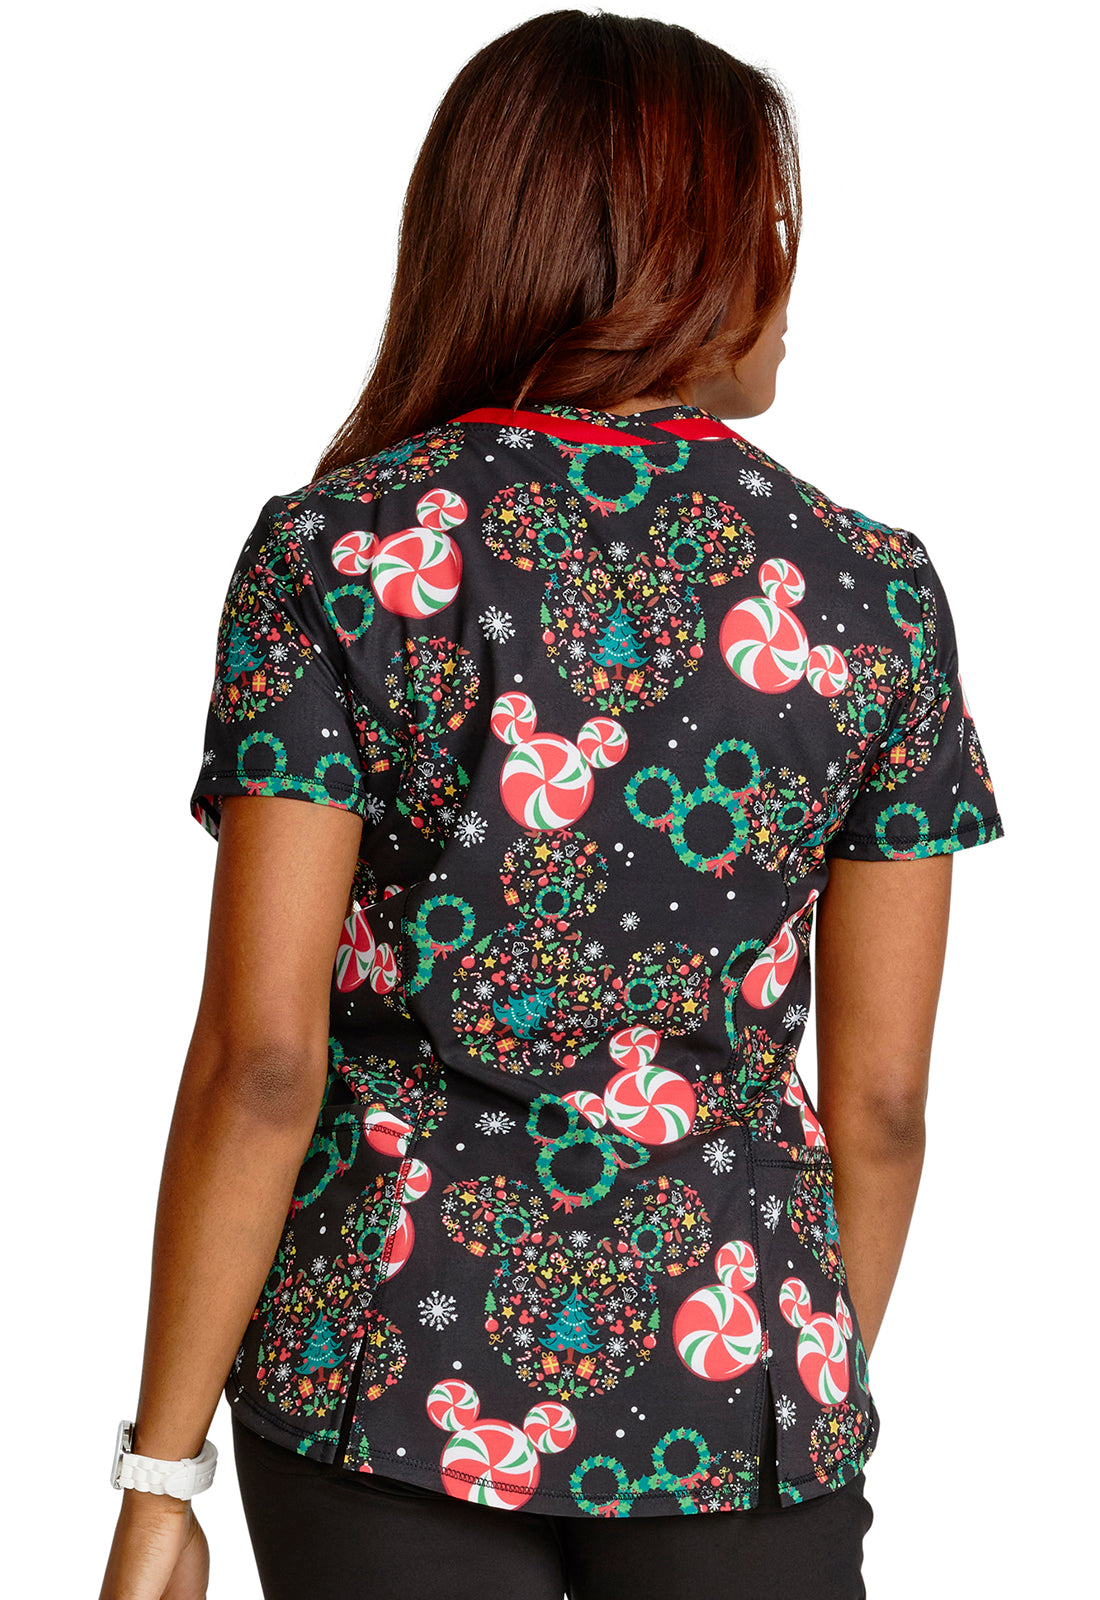 Women's Shaped V-Neck Print Top in Holiday Heads